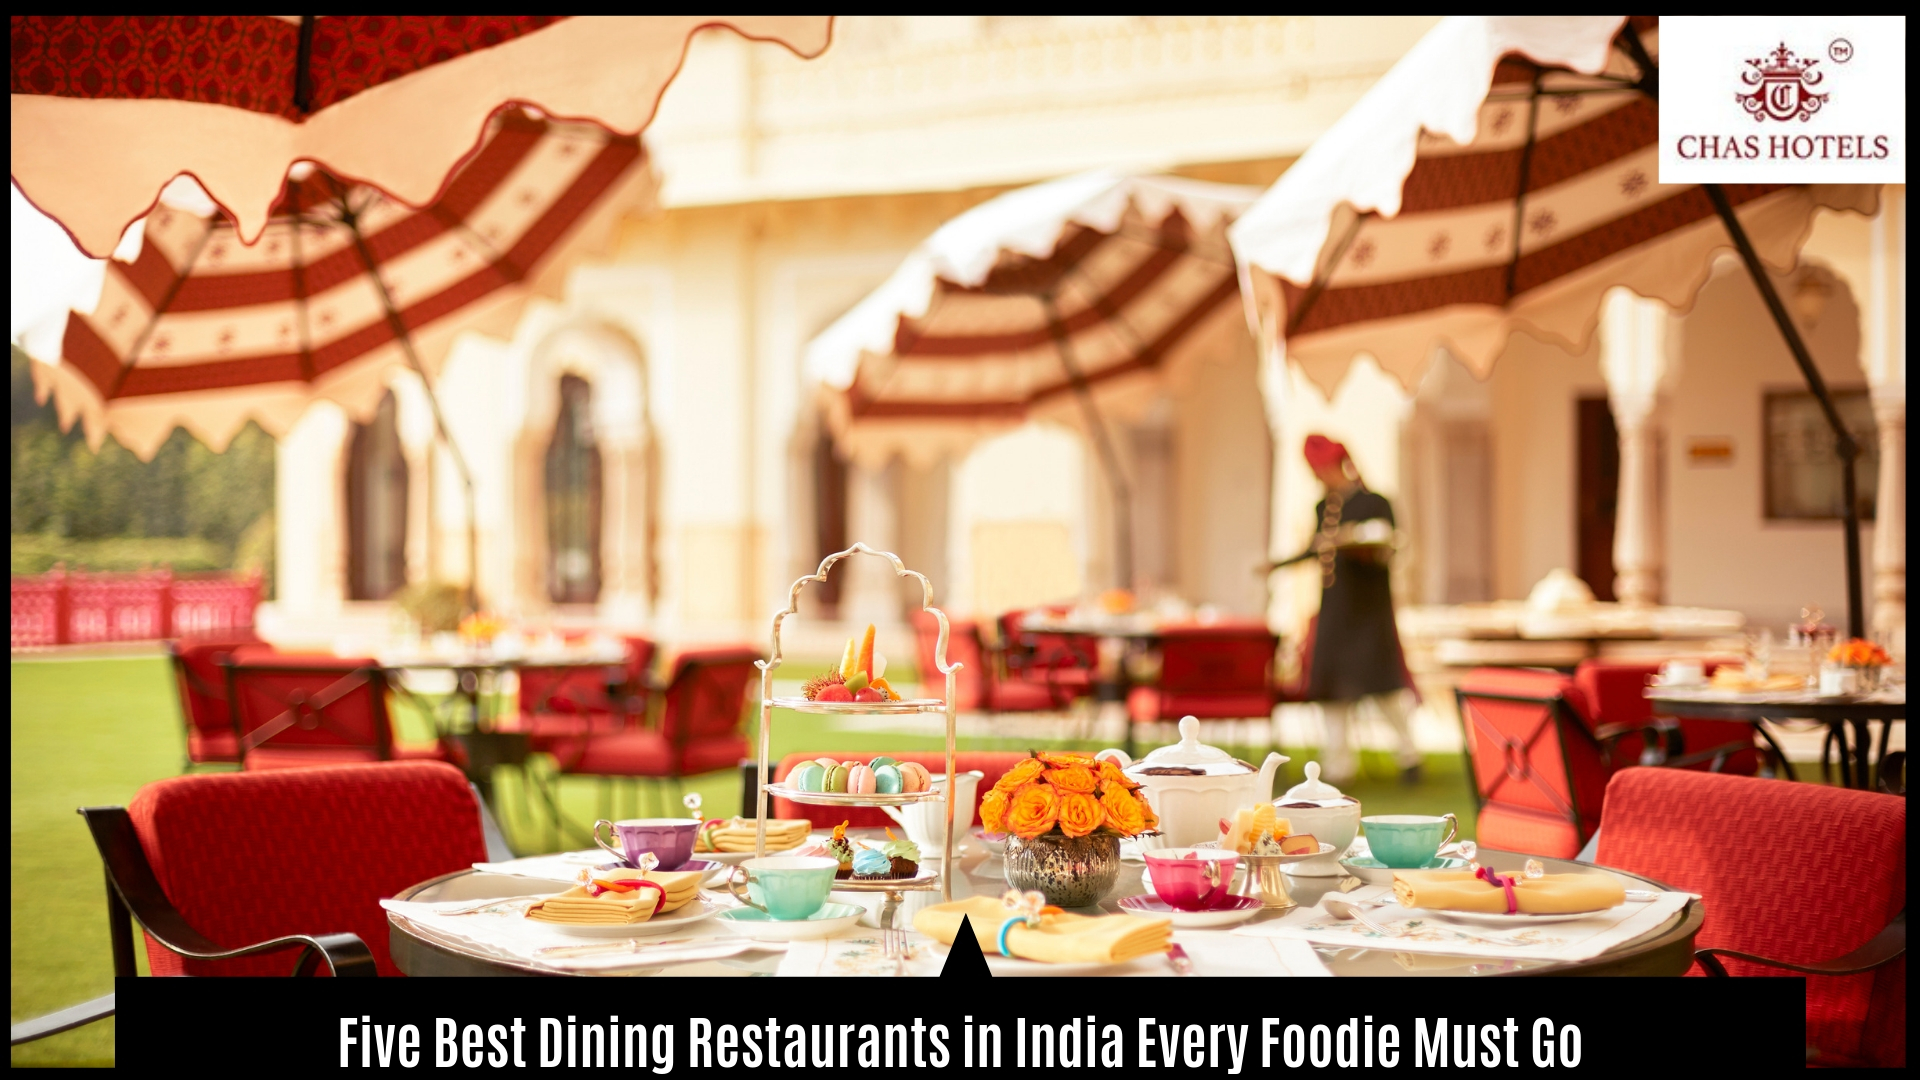 Five Best Dining Restaurants in India Every Foodie Must Go